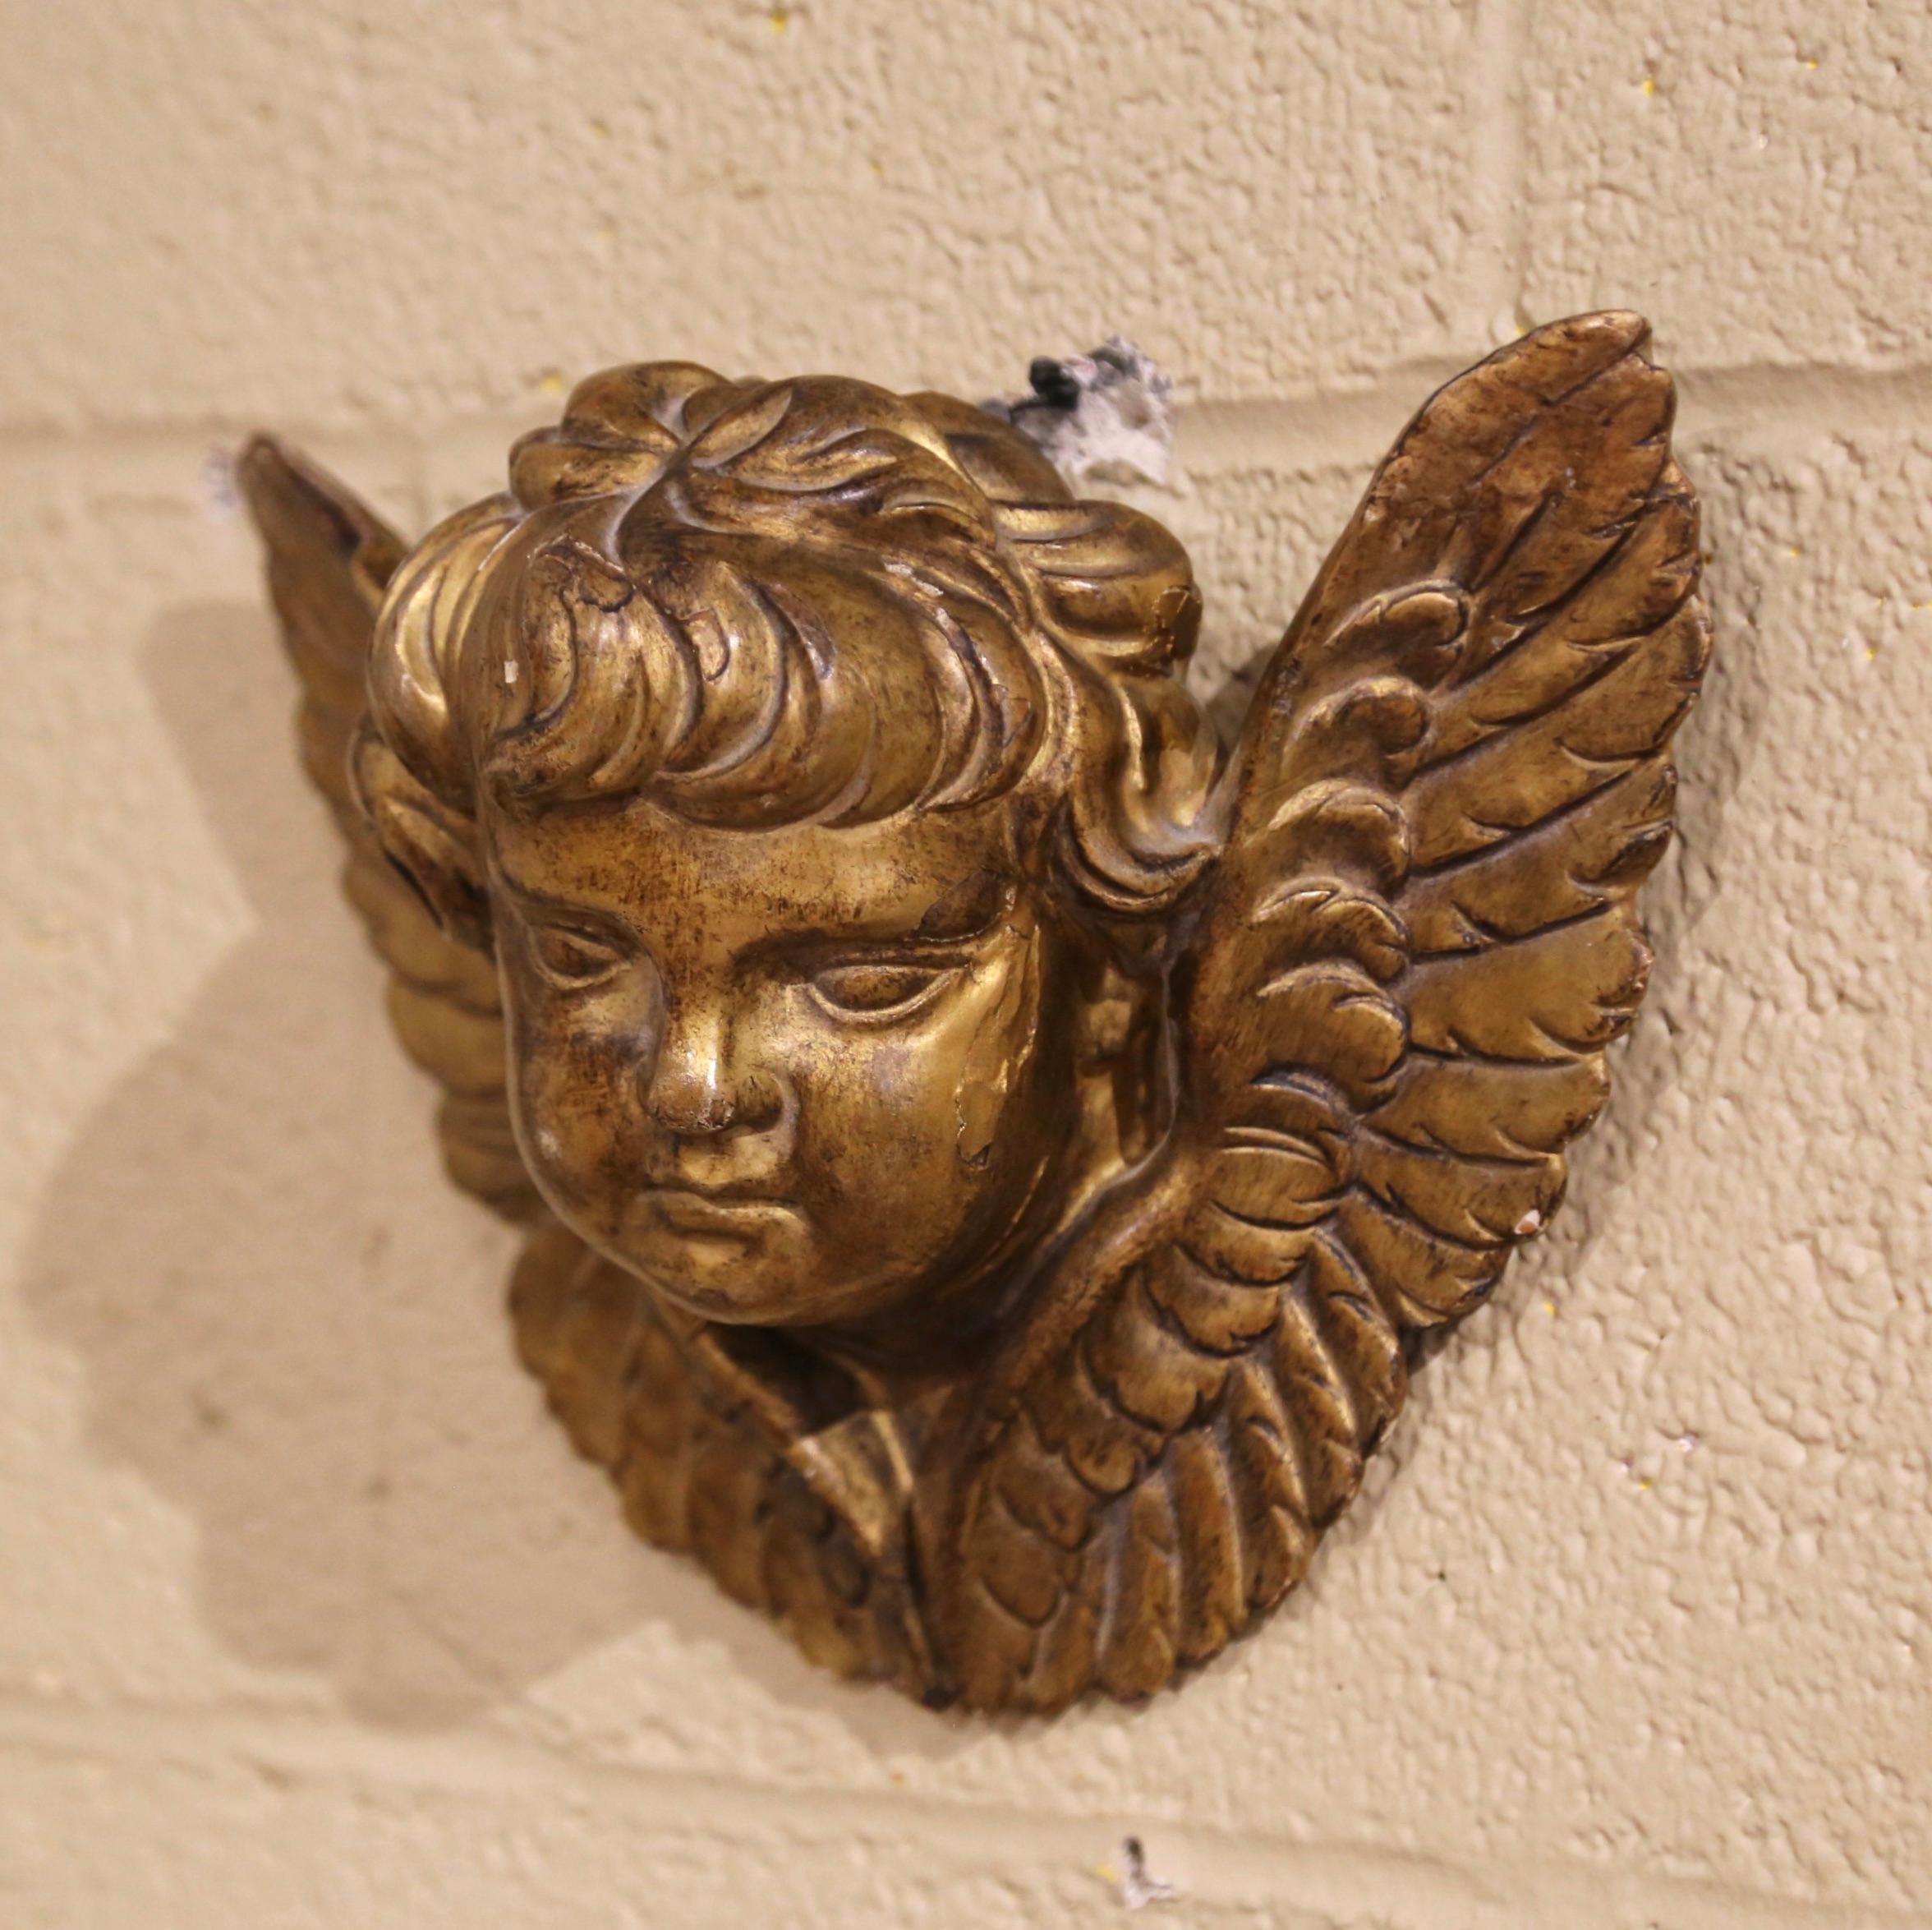 This antique religious sculpture was crafted in France circa 1860; the wall hanging carving features a hand carved cherub face with wings. The elegant putti is in excellent condition and adorns the original patinated gilt finish.
Measure: 10